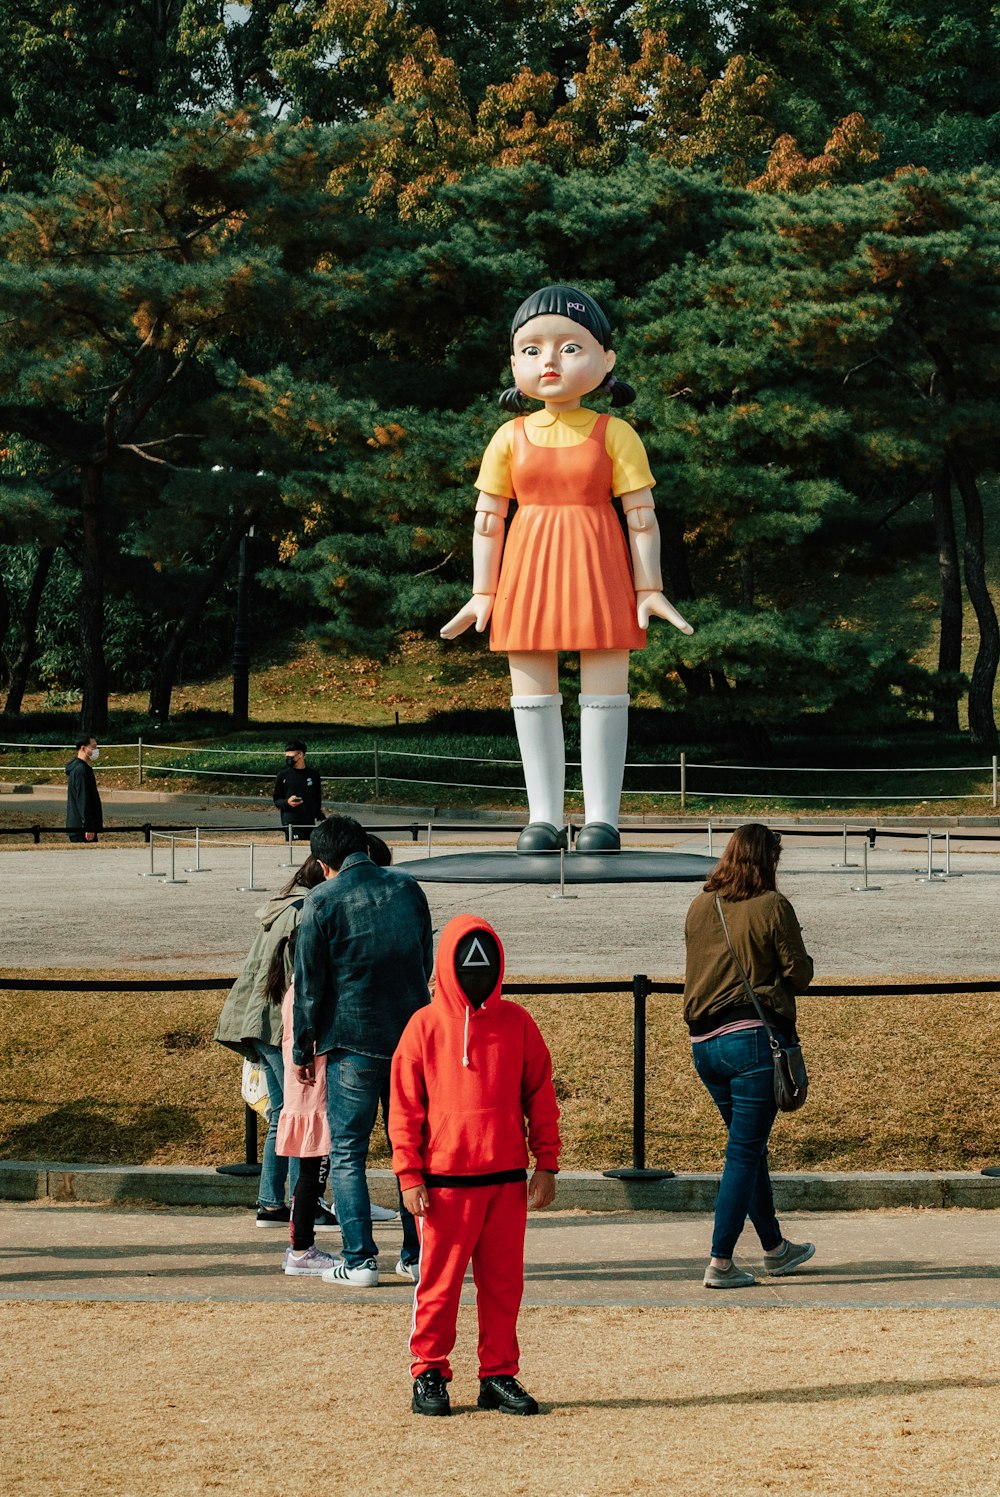 a large statue of a woman in an orange dress